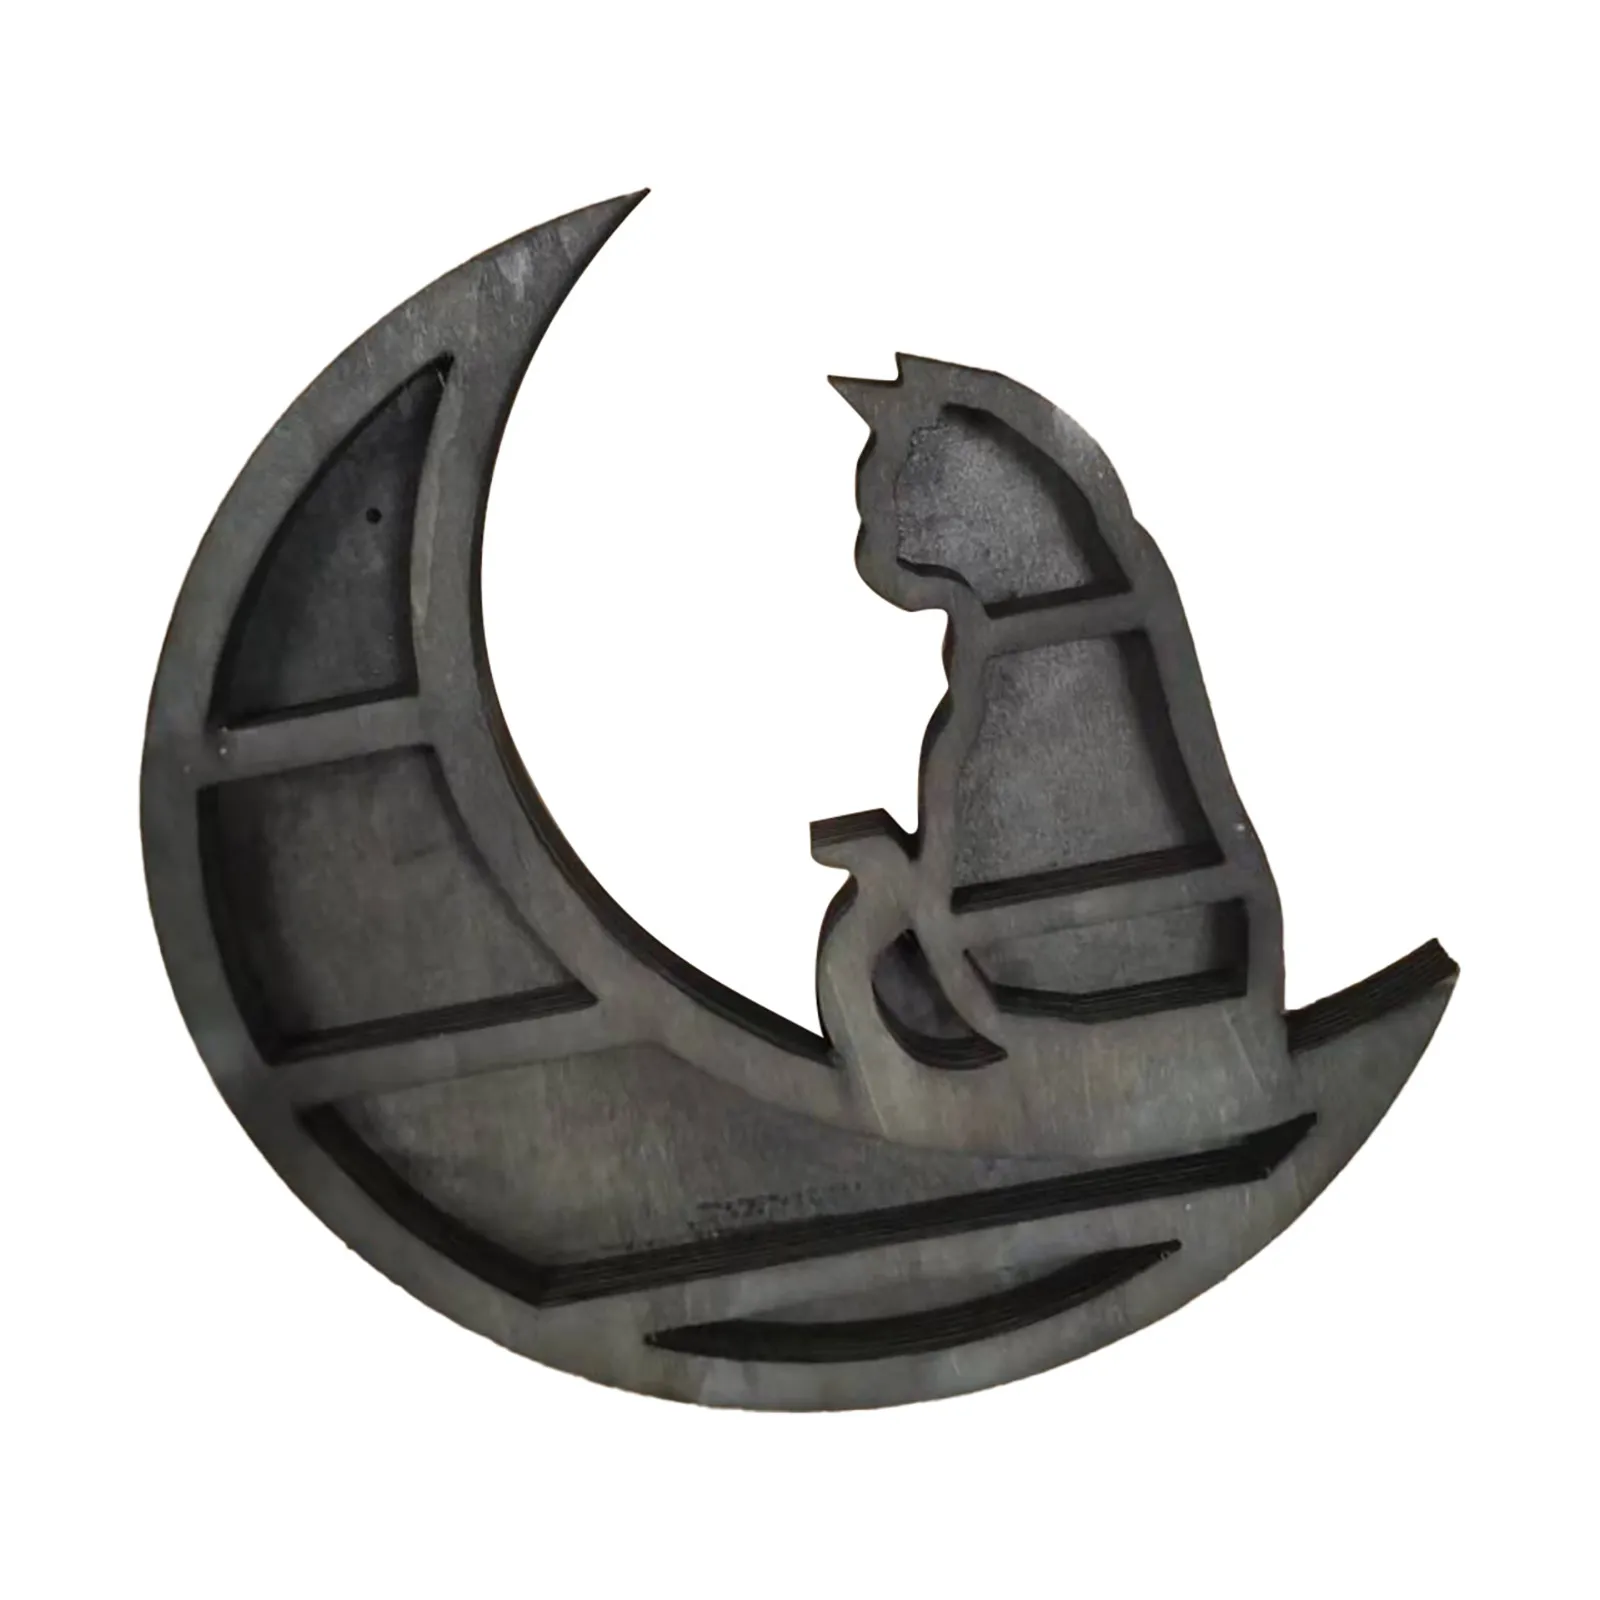 Cat and Moon Wooden Shelf for home decor2